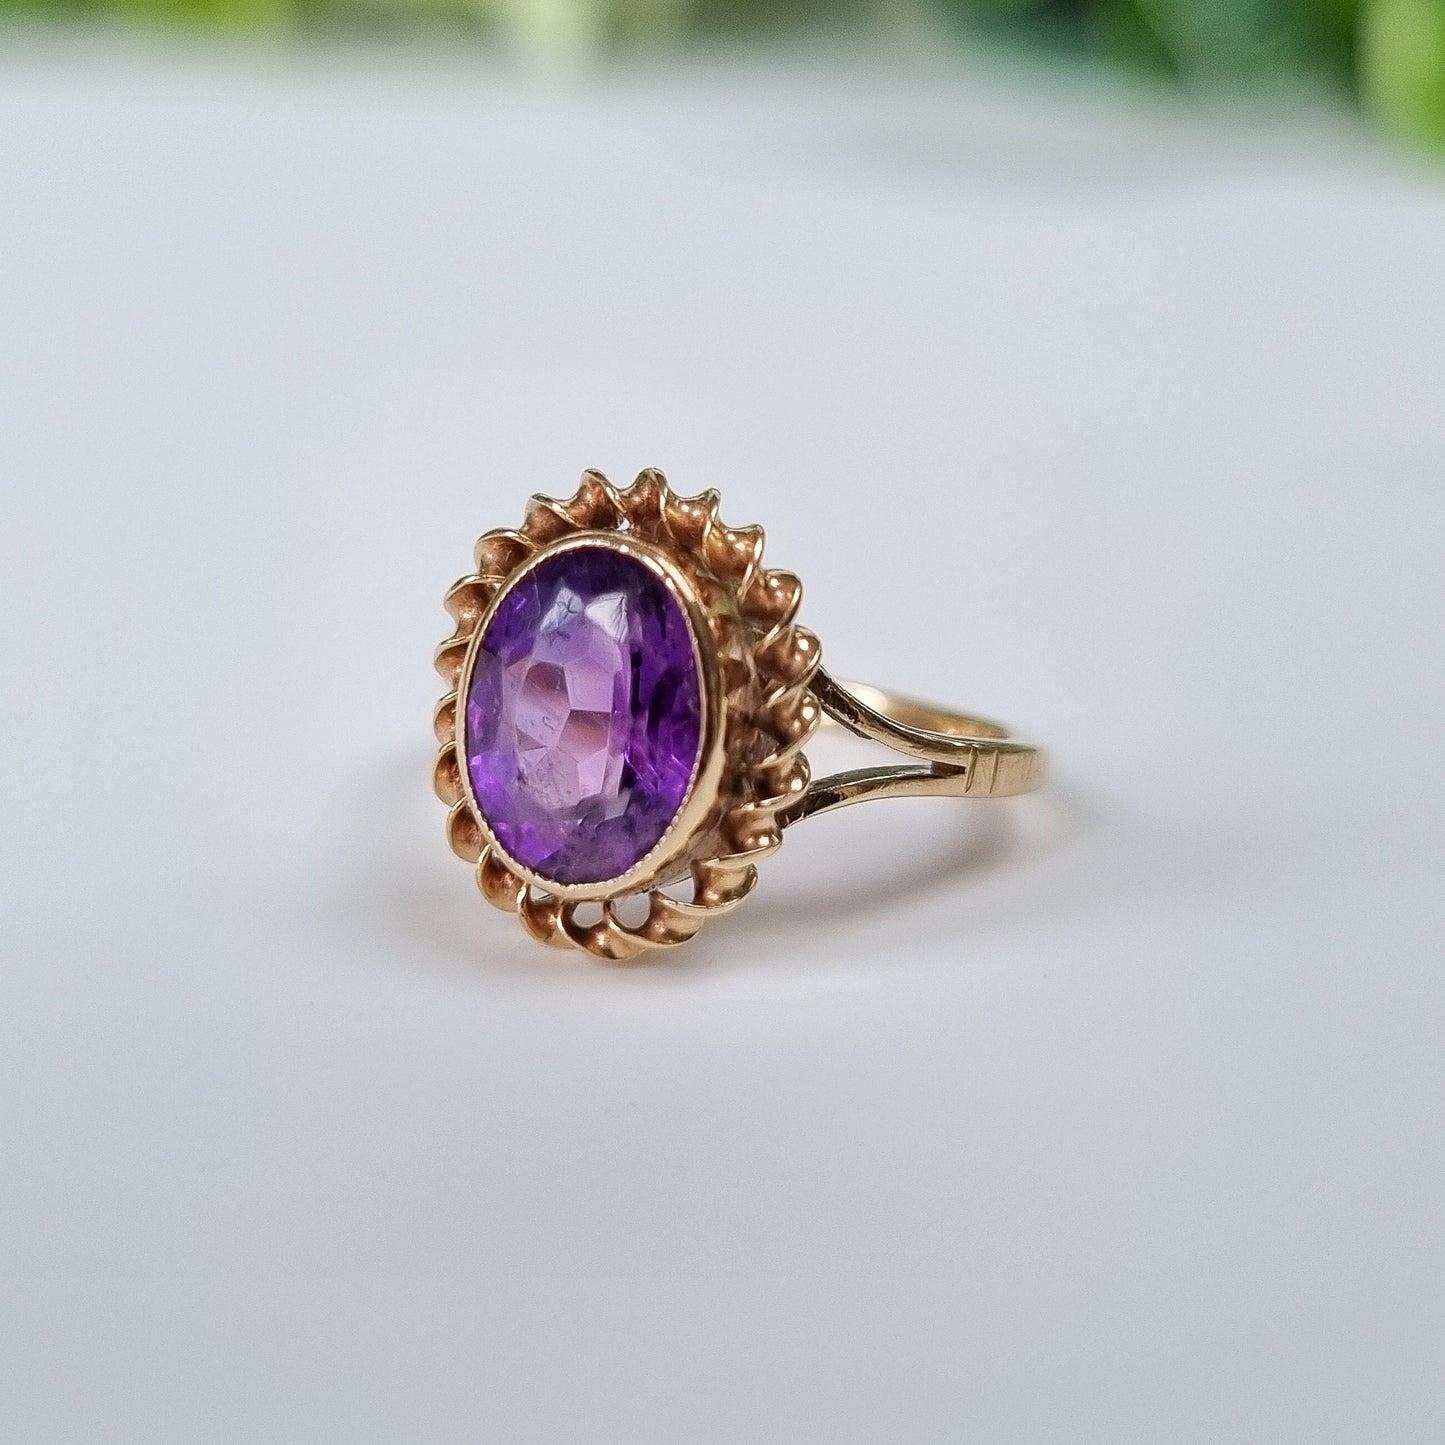 Vintage 9ct Yellow Gold Amethyst Solitaire Ring